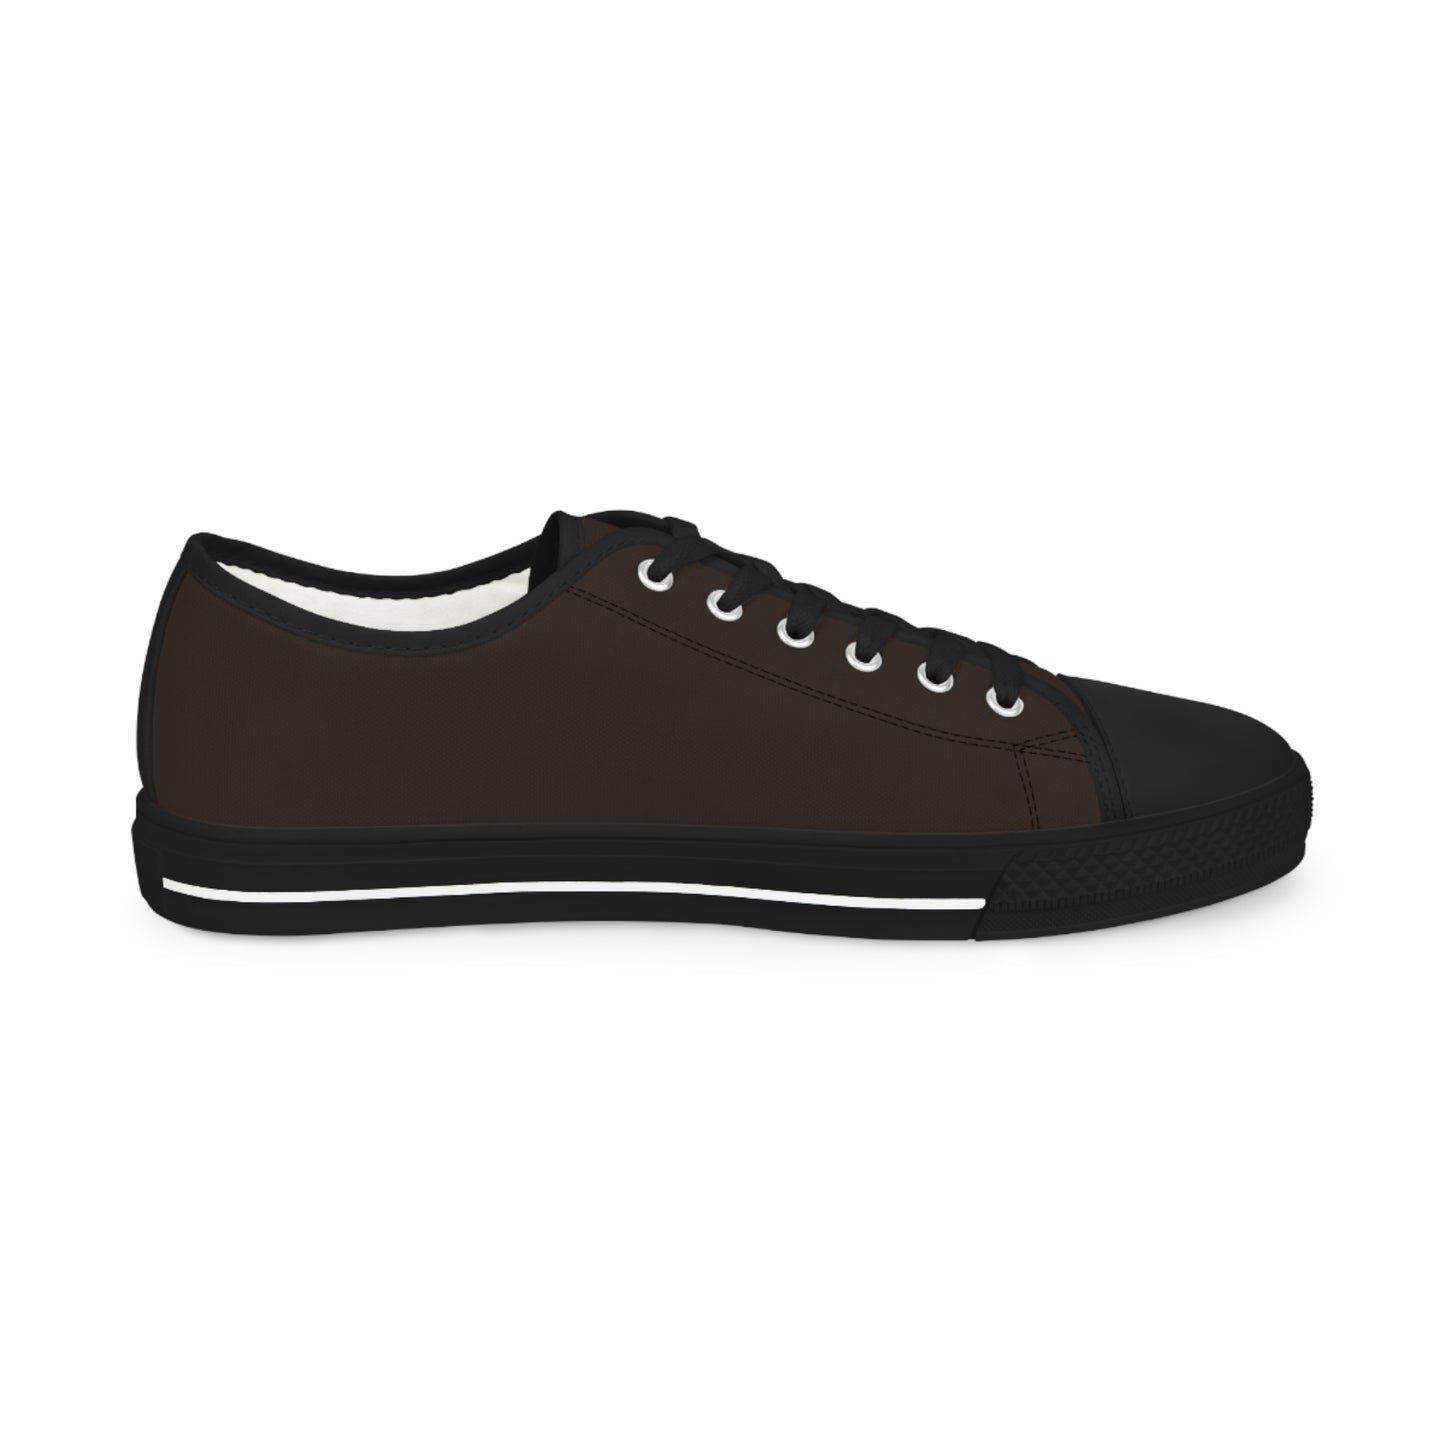 Men's Canvas Low Top Solid Color Sneakers - Chocolate Cherry US 14 Black sole